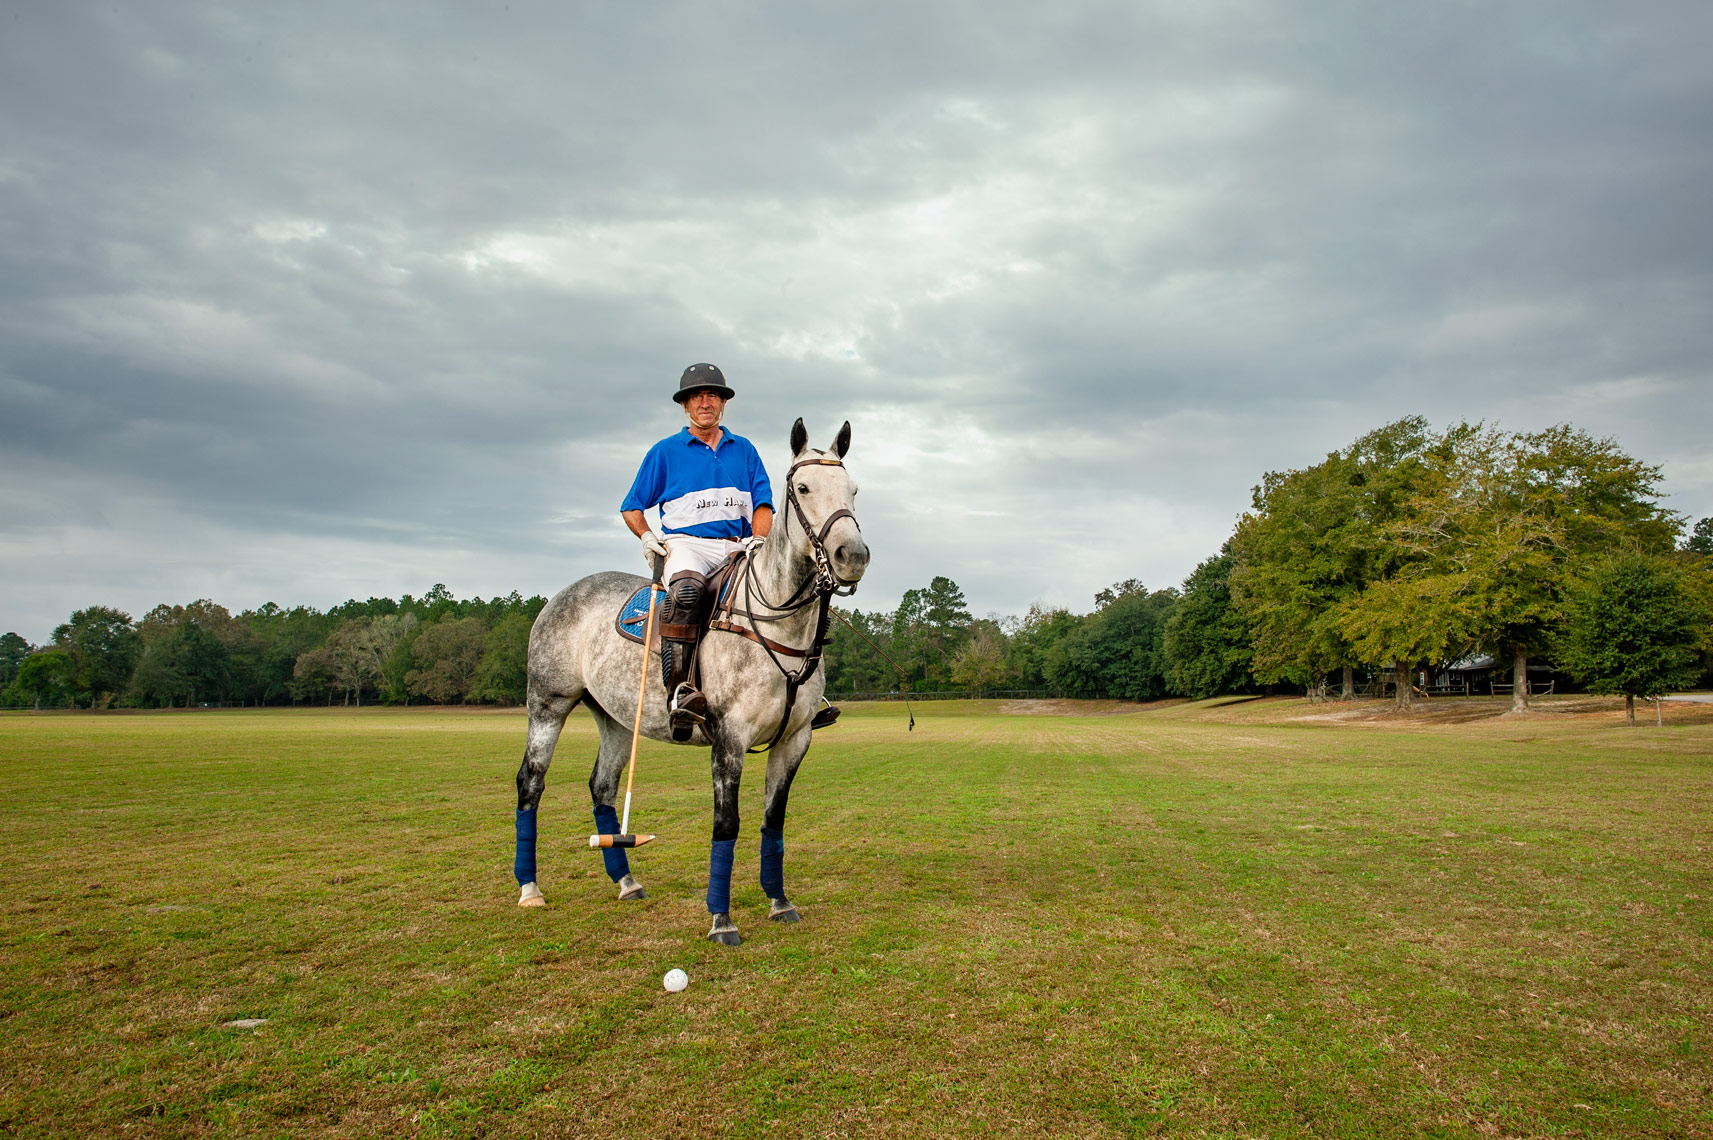 Ten Goal American Polo player Adam Snow and his horse stand for a portrait